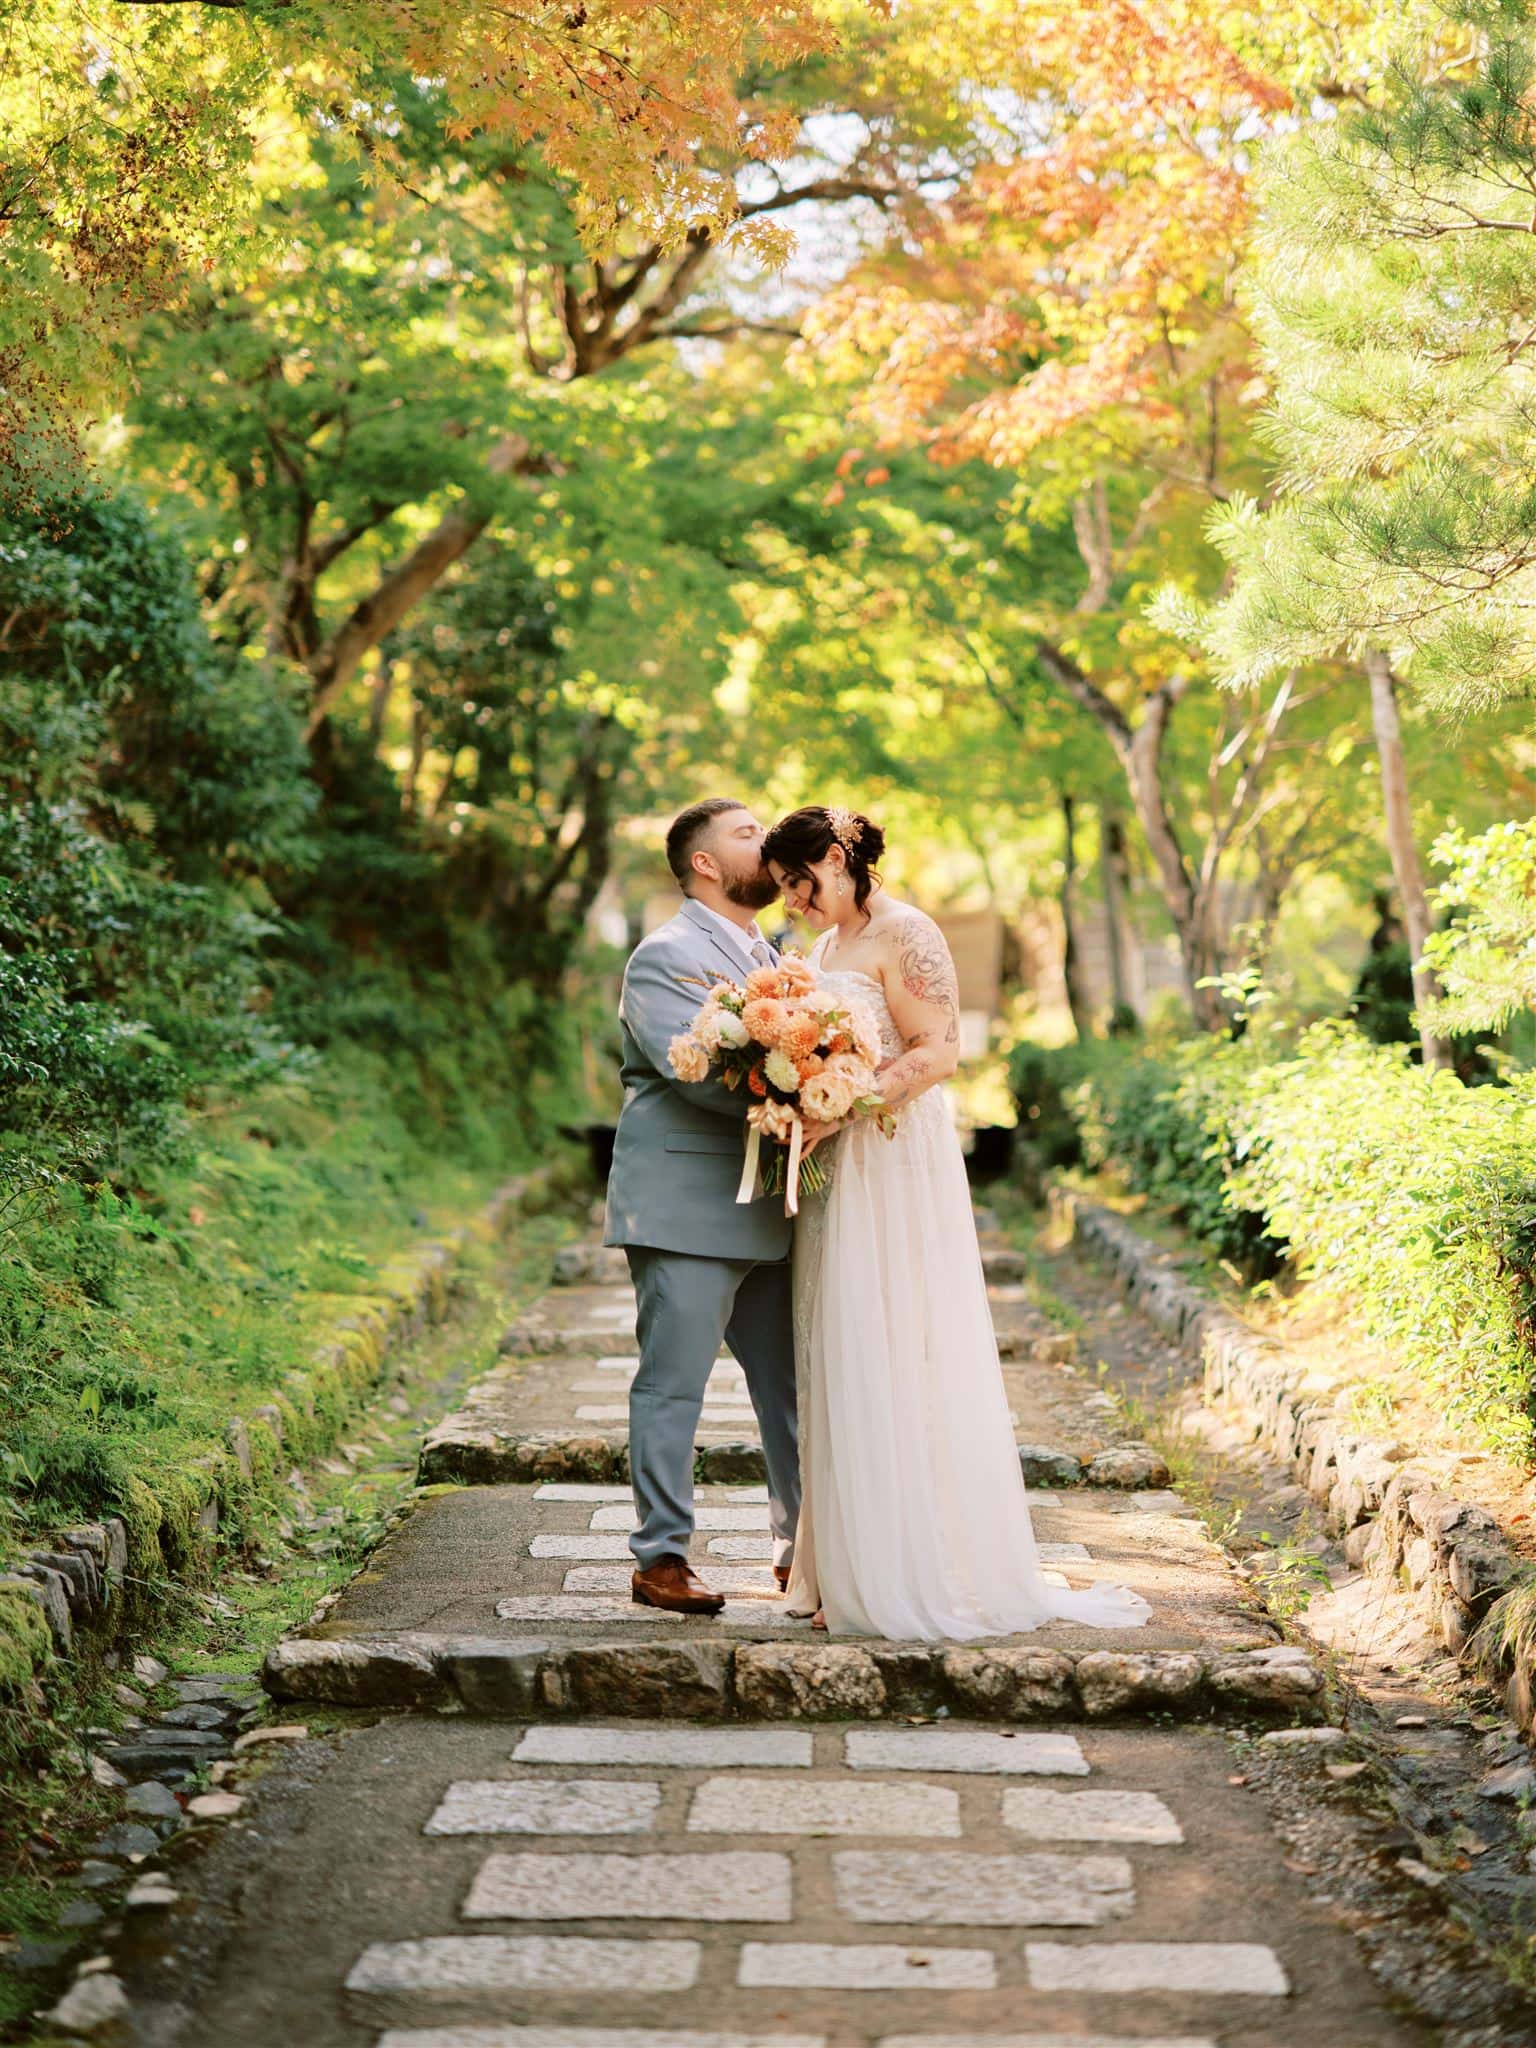 Japan Elopement Wedding Photographer, Planner & Videographer | A Kyoto bride and groom kissing on a stone path in a garden during their wedding.